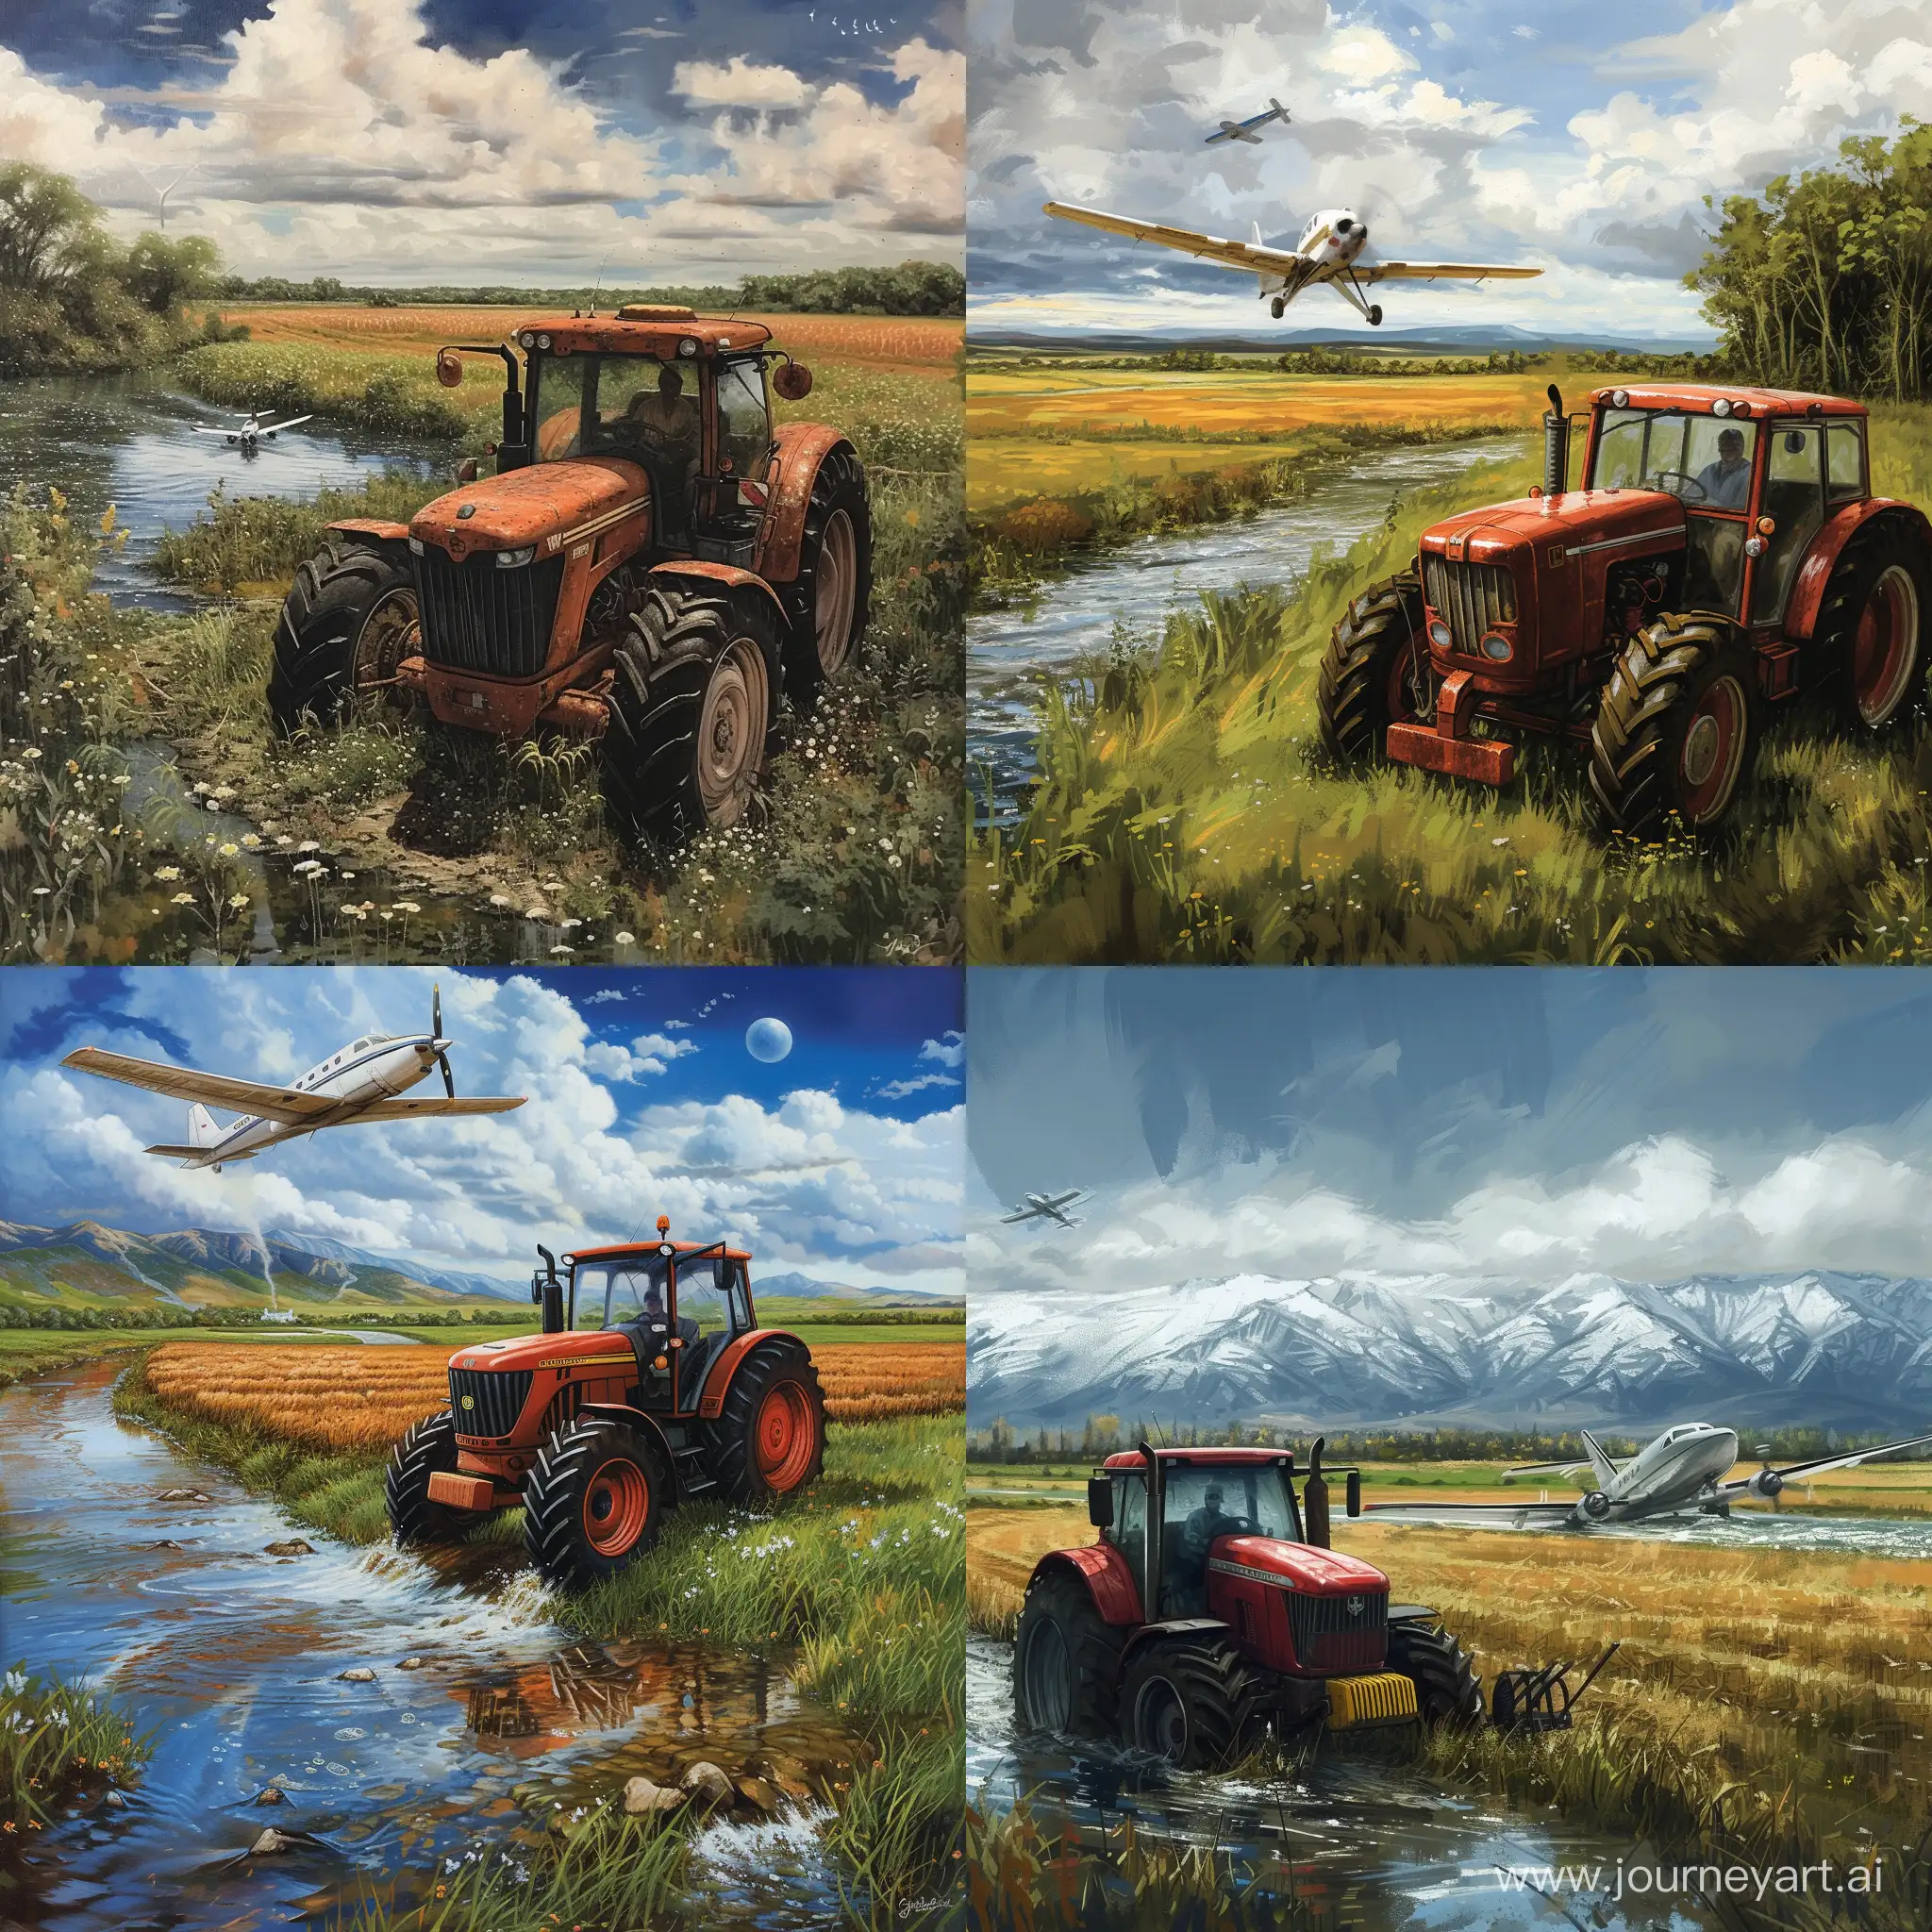 Rural-Landscape-Tractor-in-the-Field-and-Plane-in-the-River